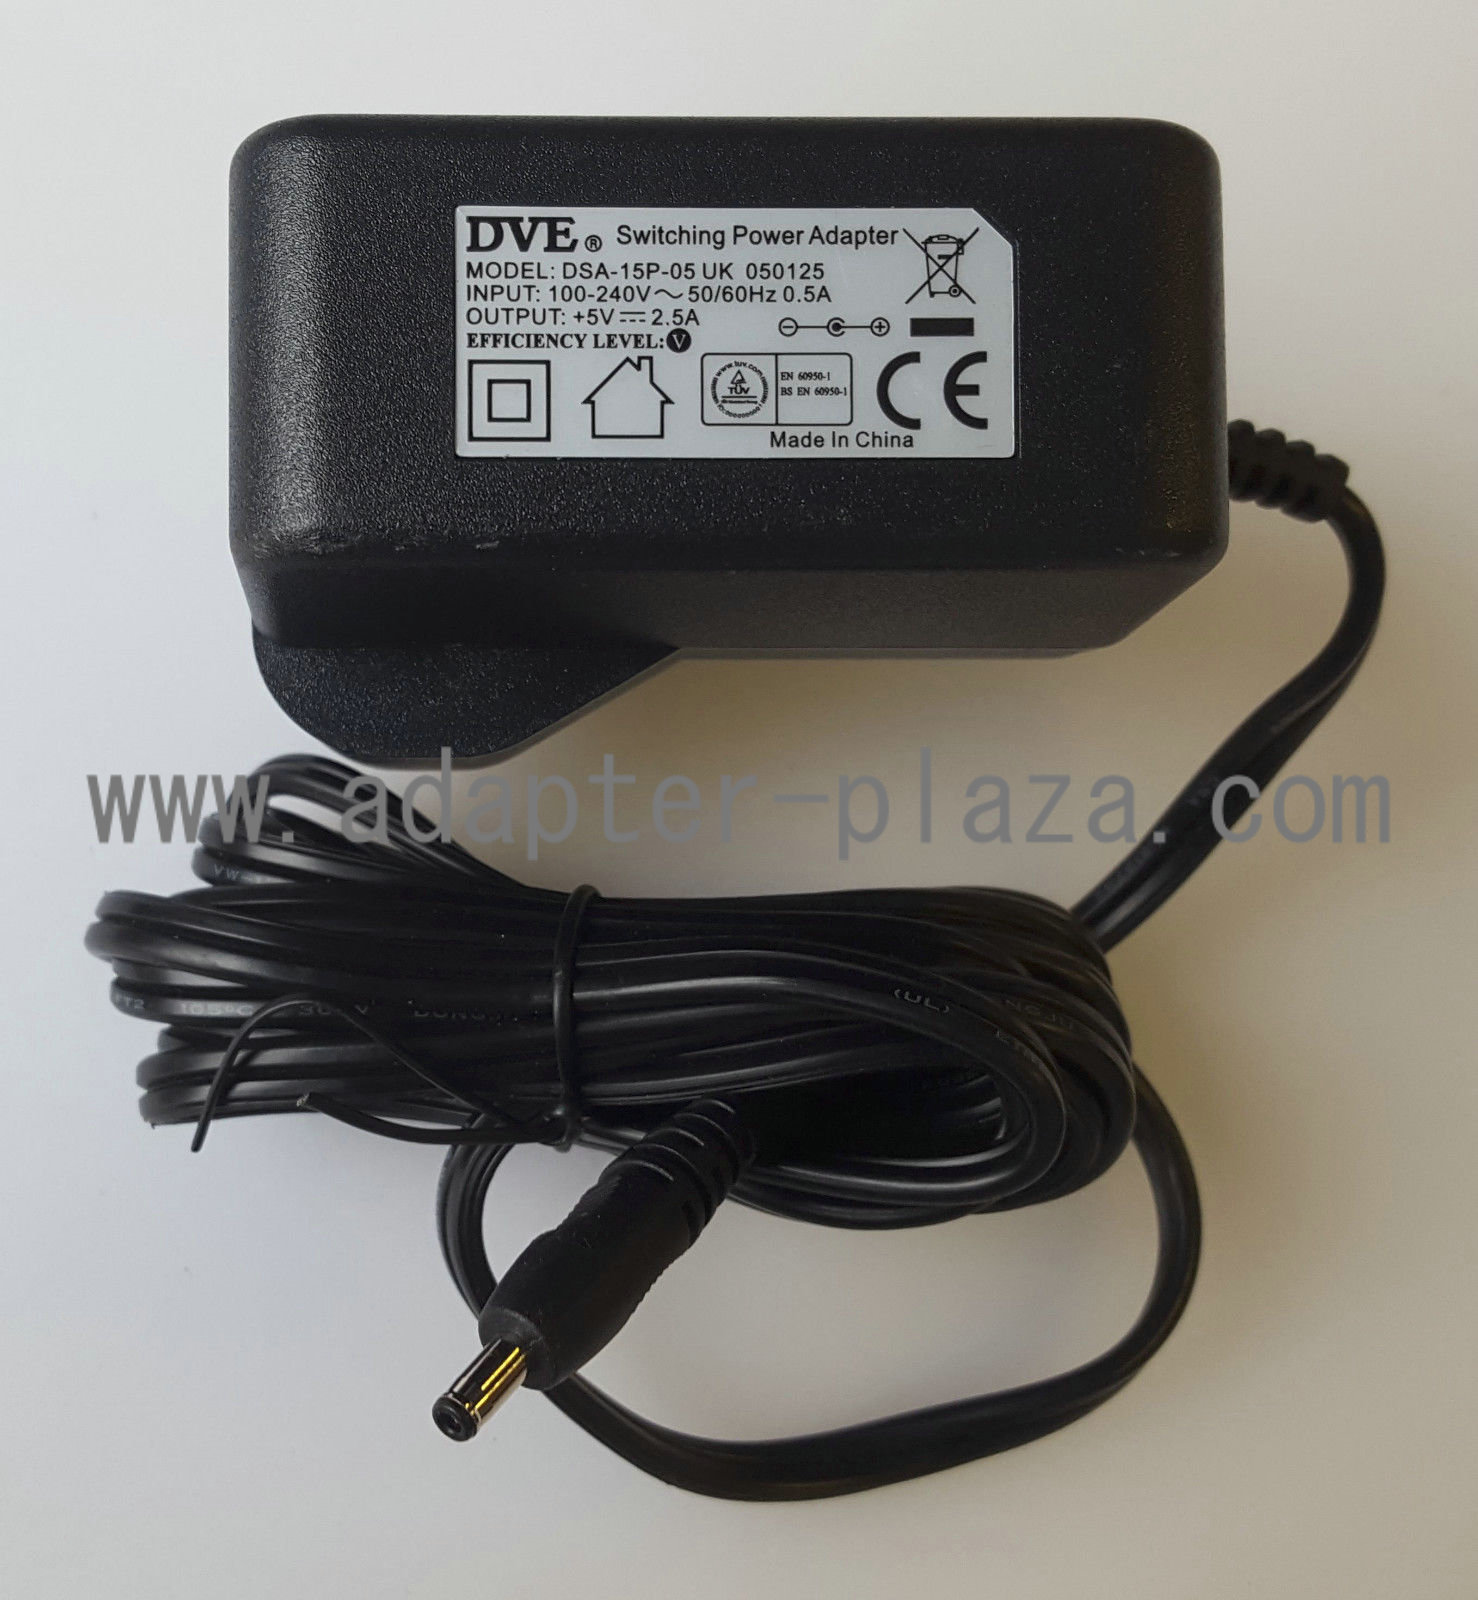 New DVE DSA-15P-05 5V 2.5A AC/DC SWITCHING POWER SUPPLY ADAPTER